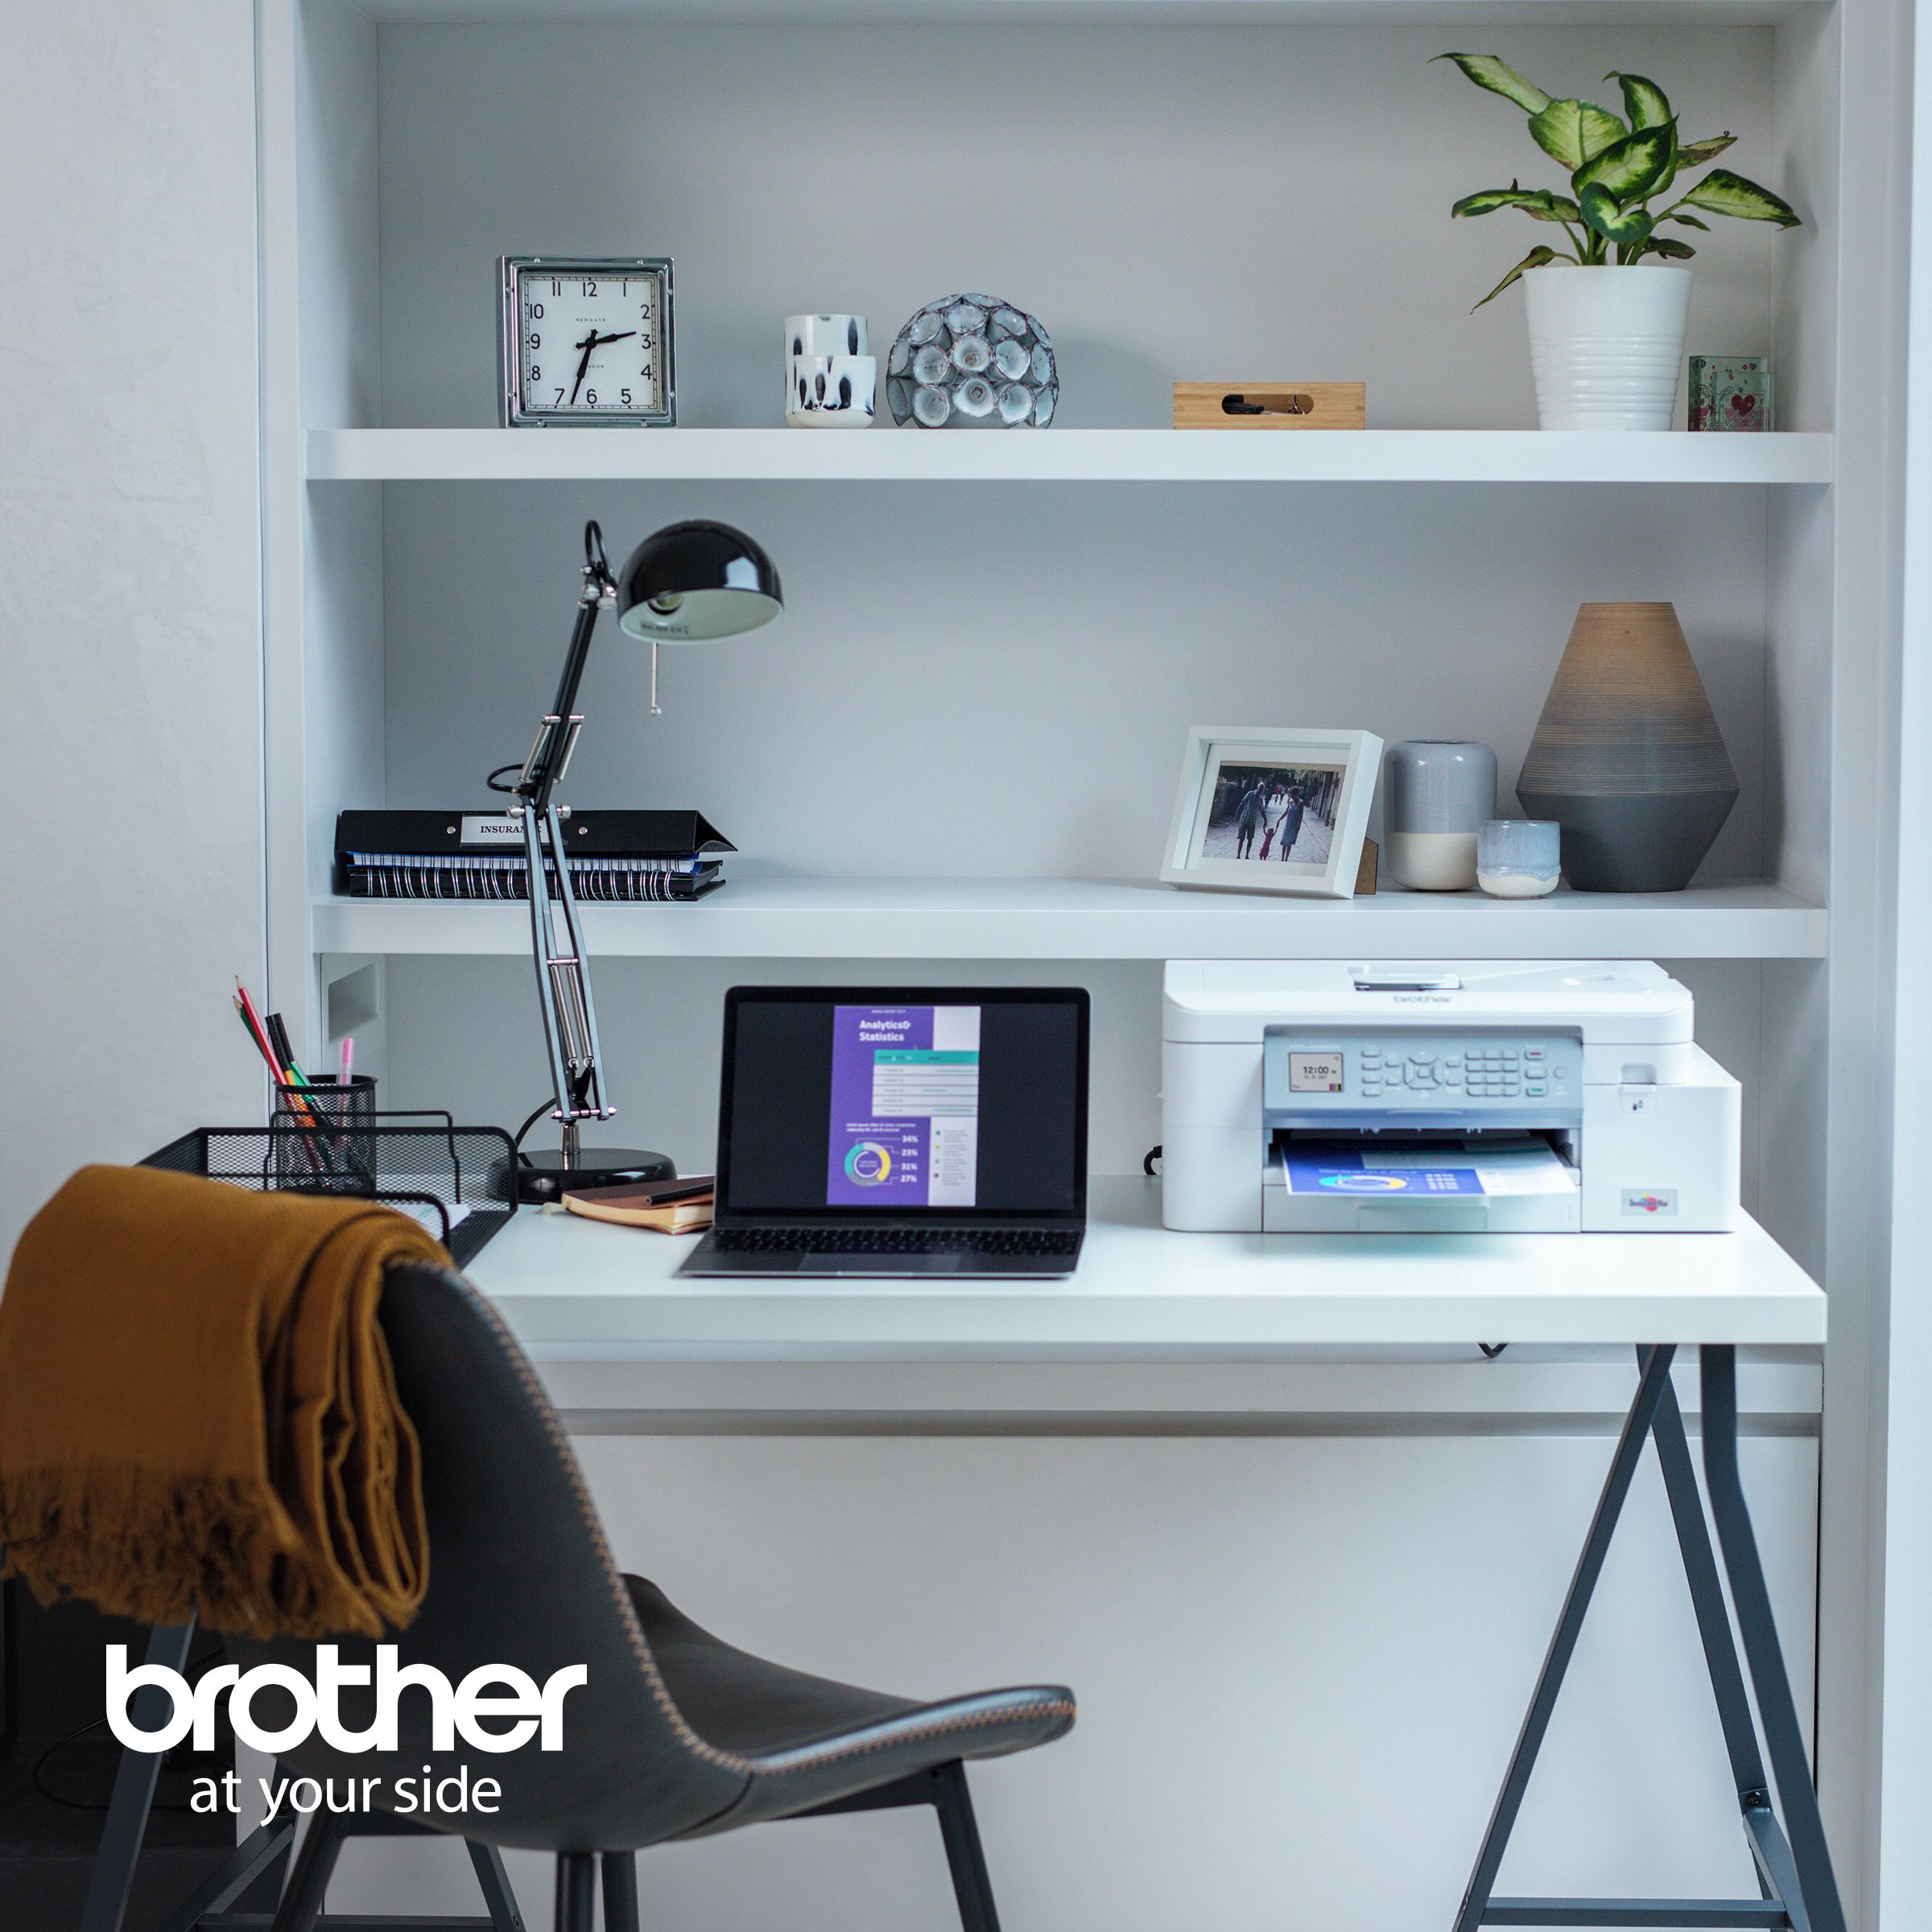 Upgrade your home office with Brother inkjet printers